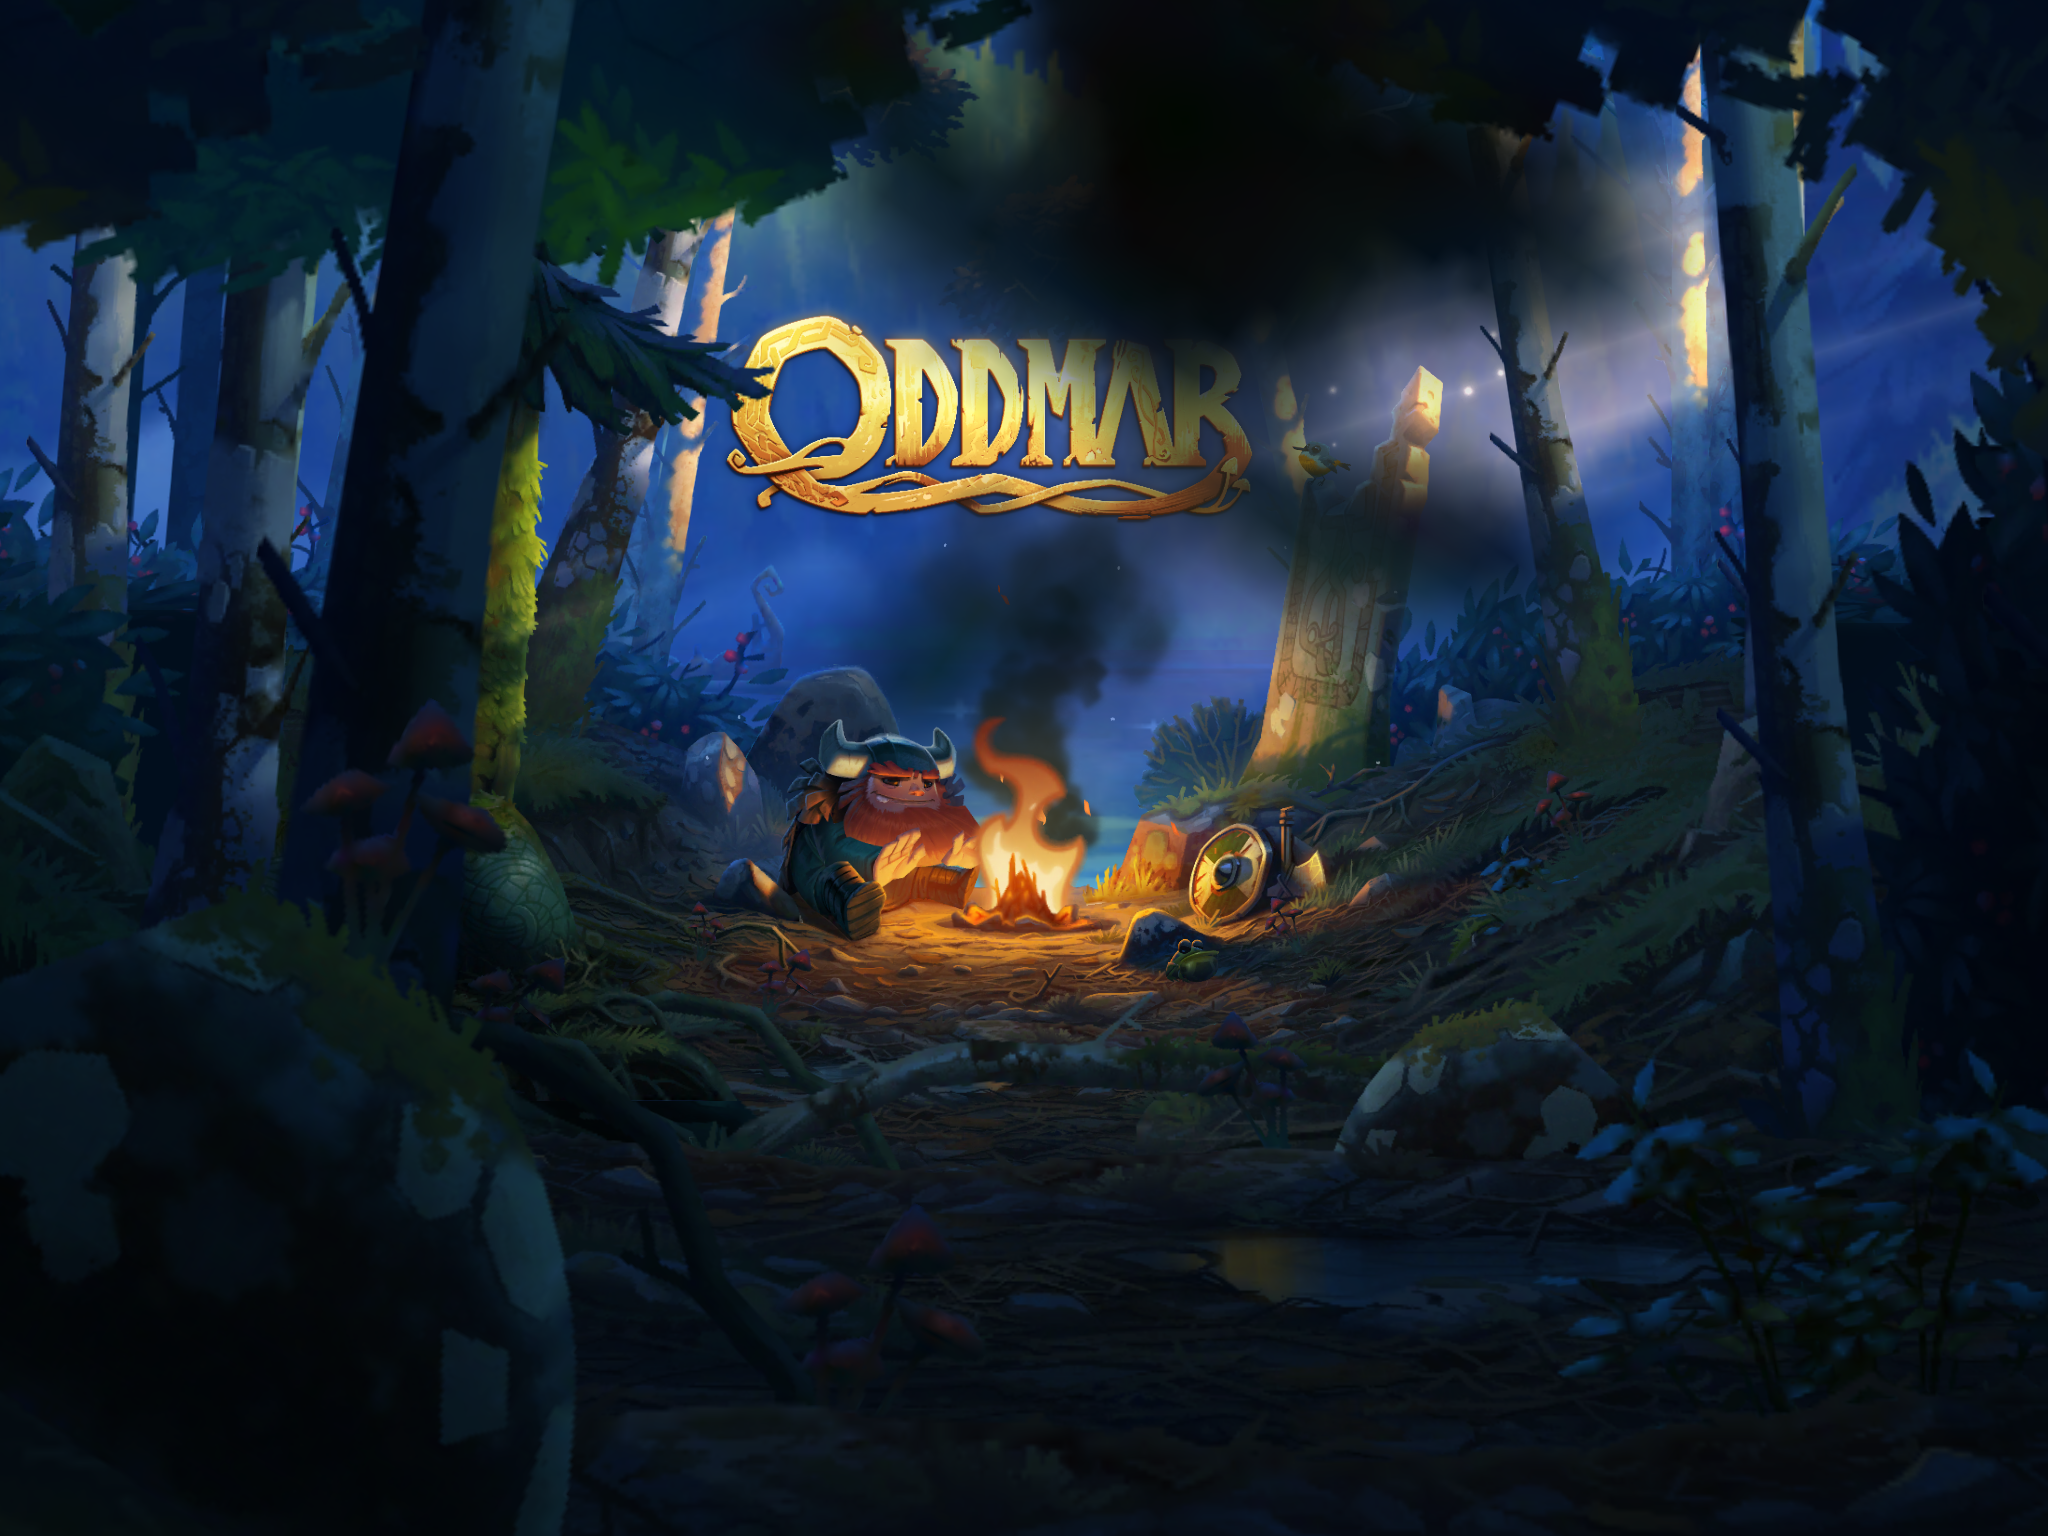 Did you play the game Oddmar?